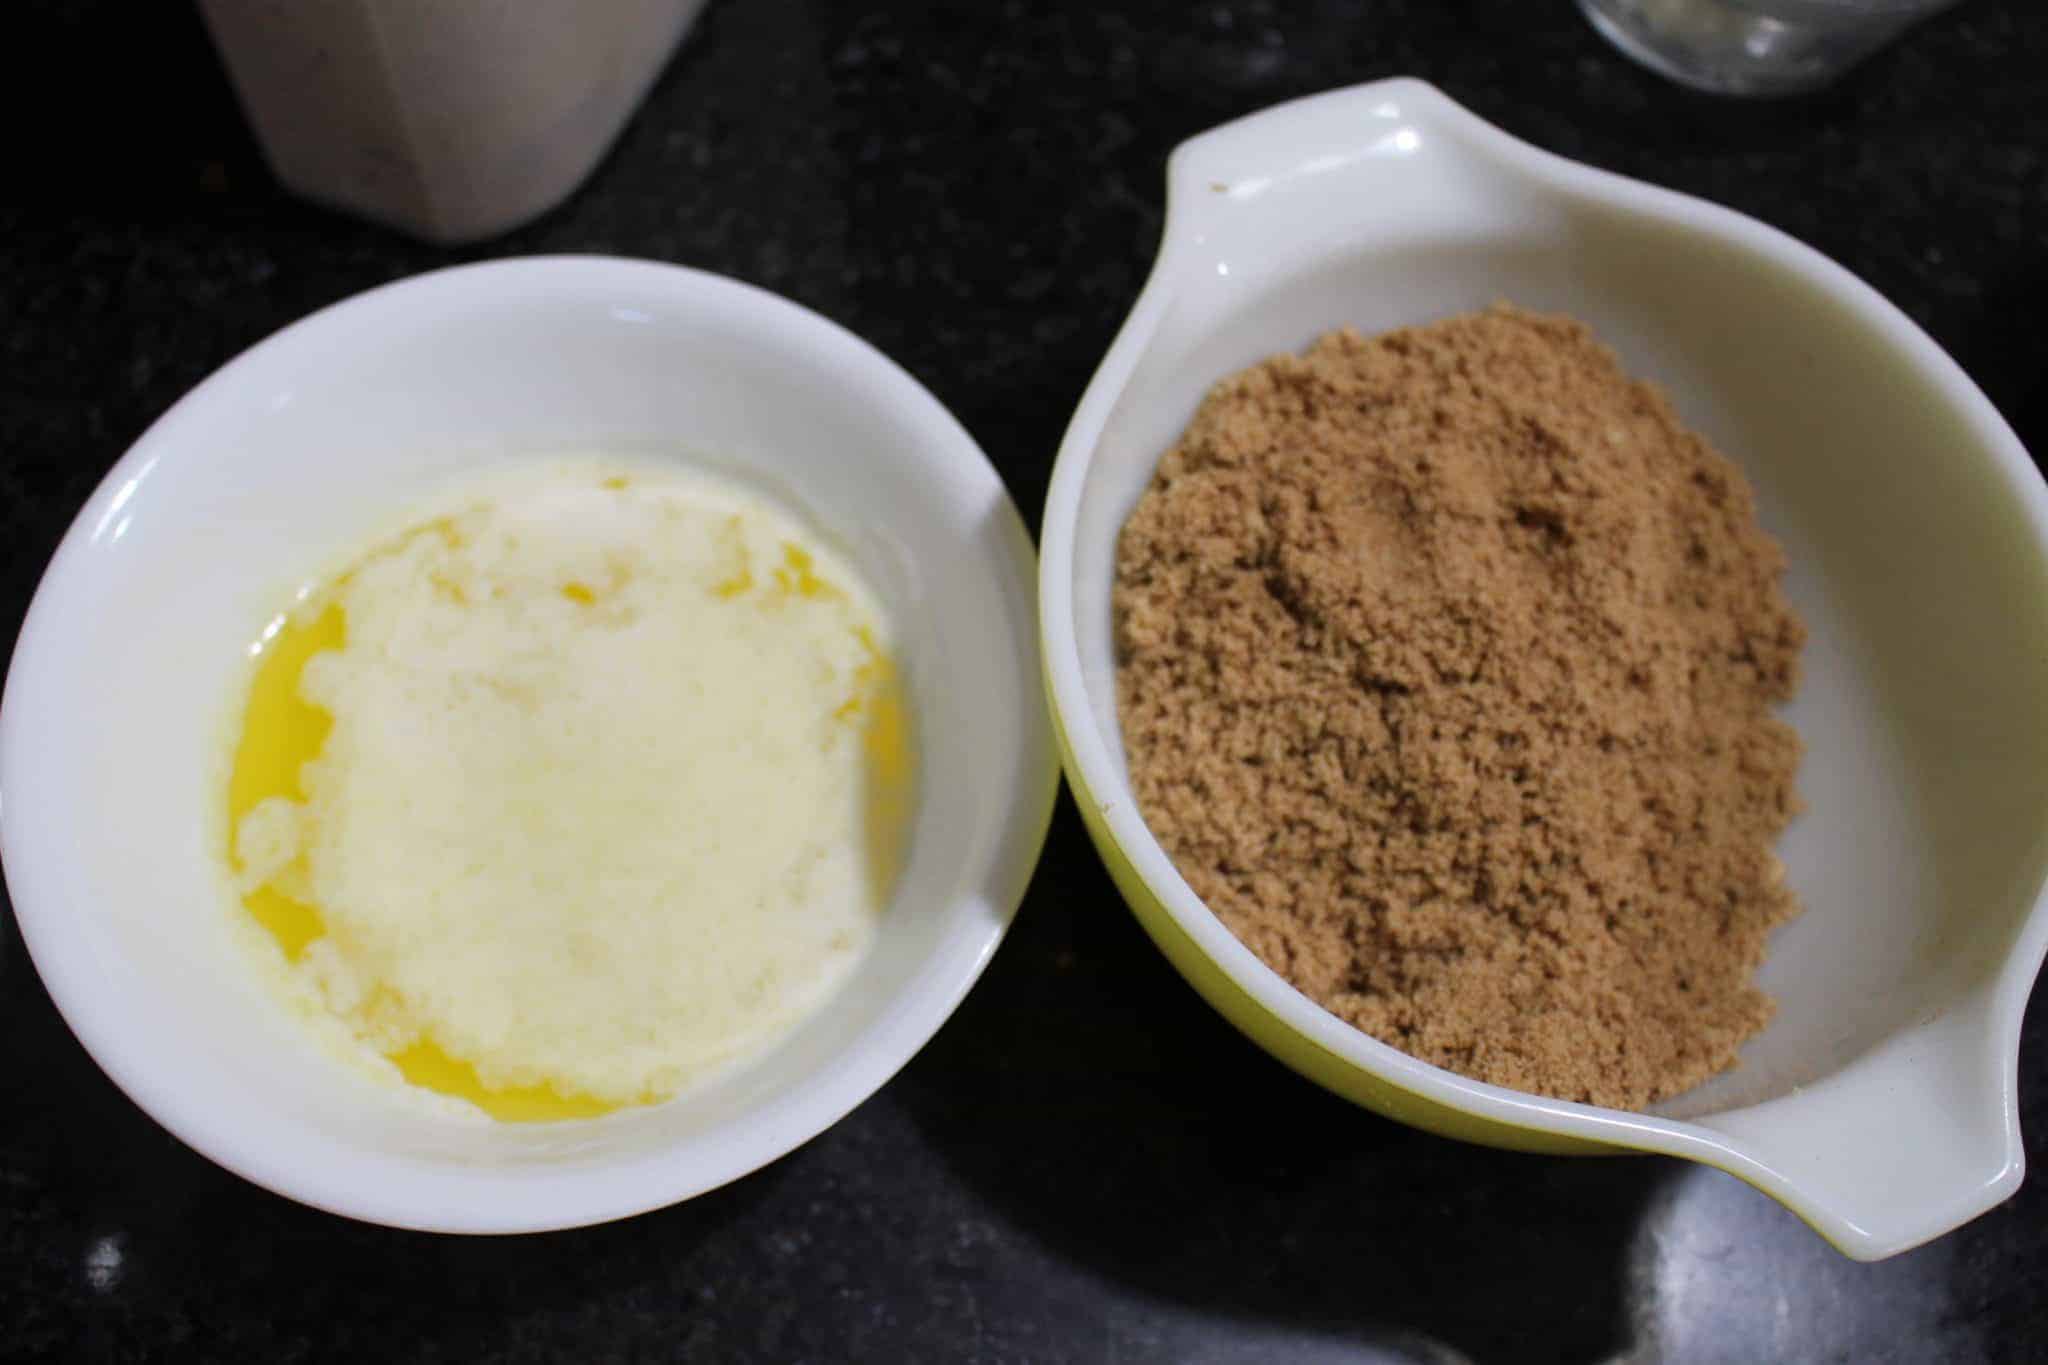 Cinnamon and brown sugar mixture with melted butter